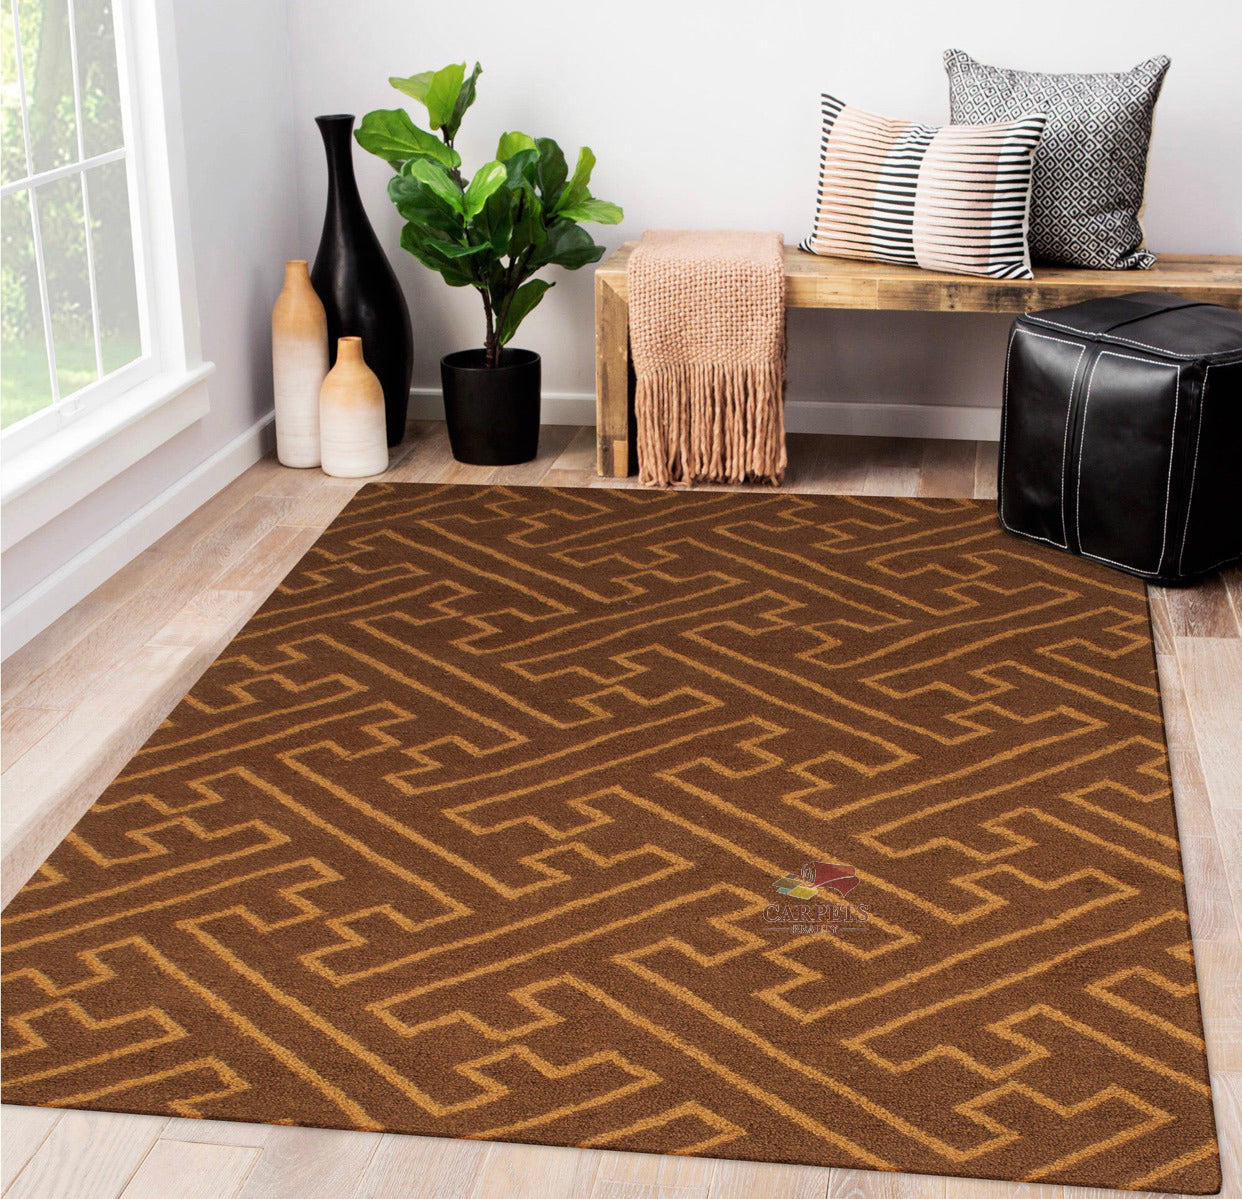 Beautiful modern pattern carpet for bedrooms and living rooms